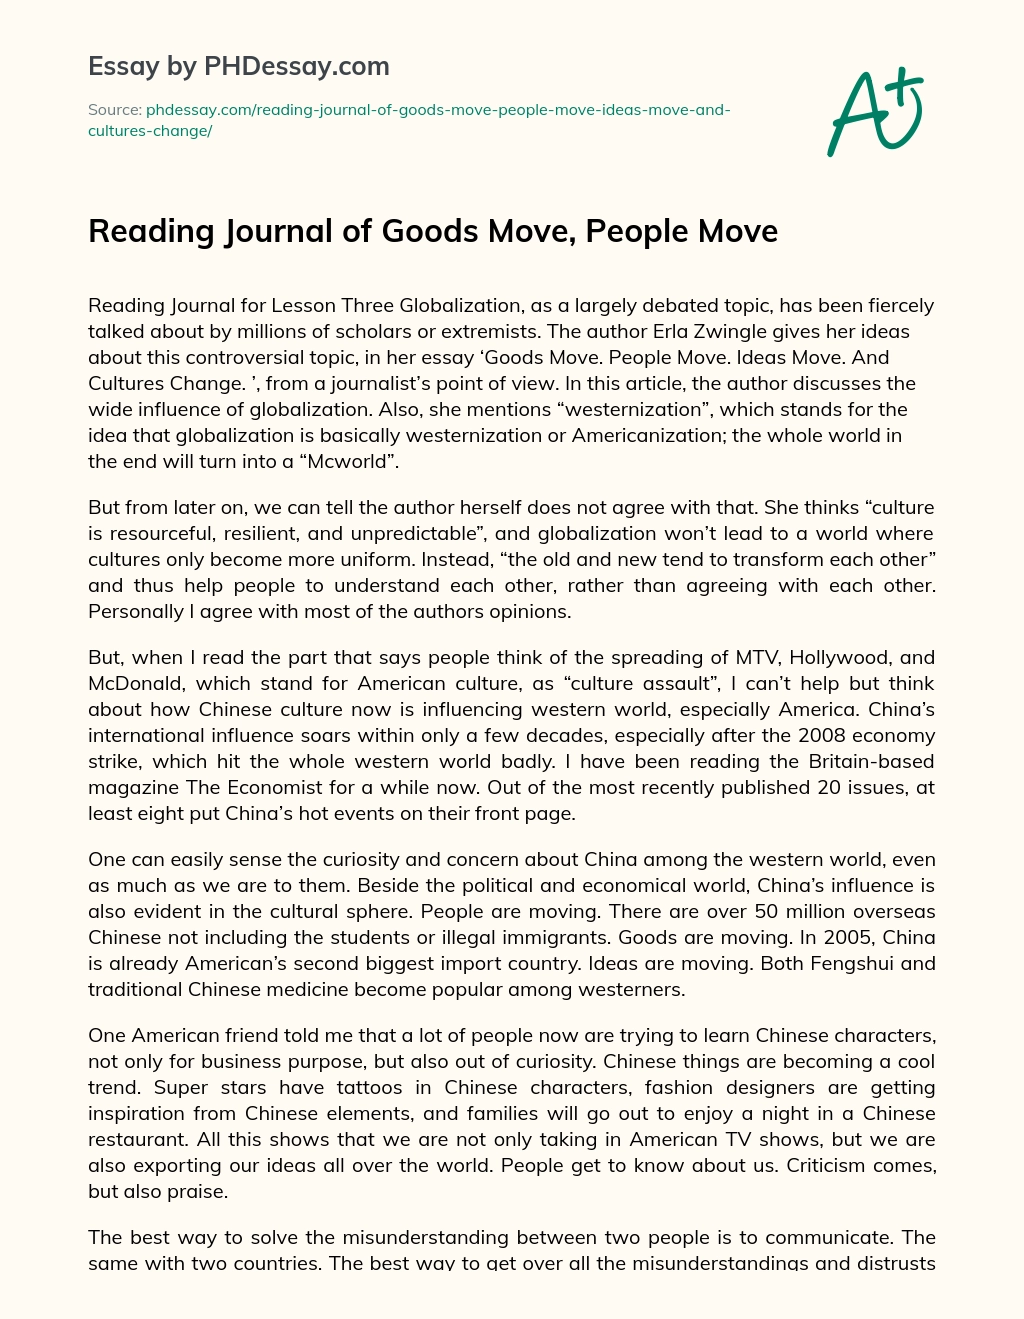 Reading Journal of Goods Move, People Move essay